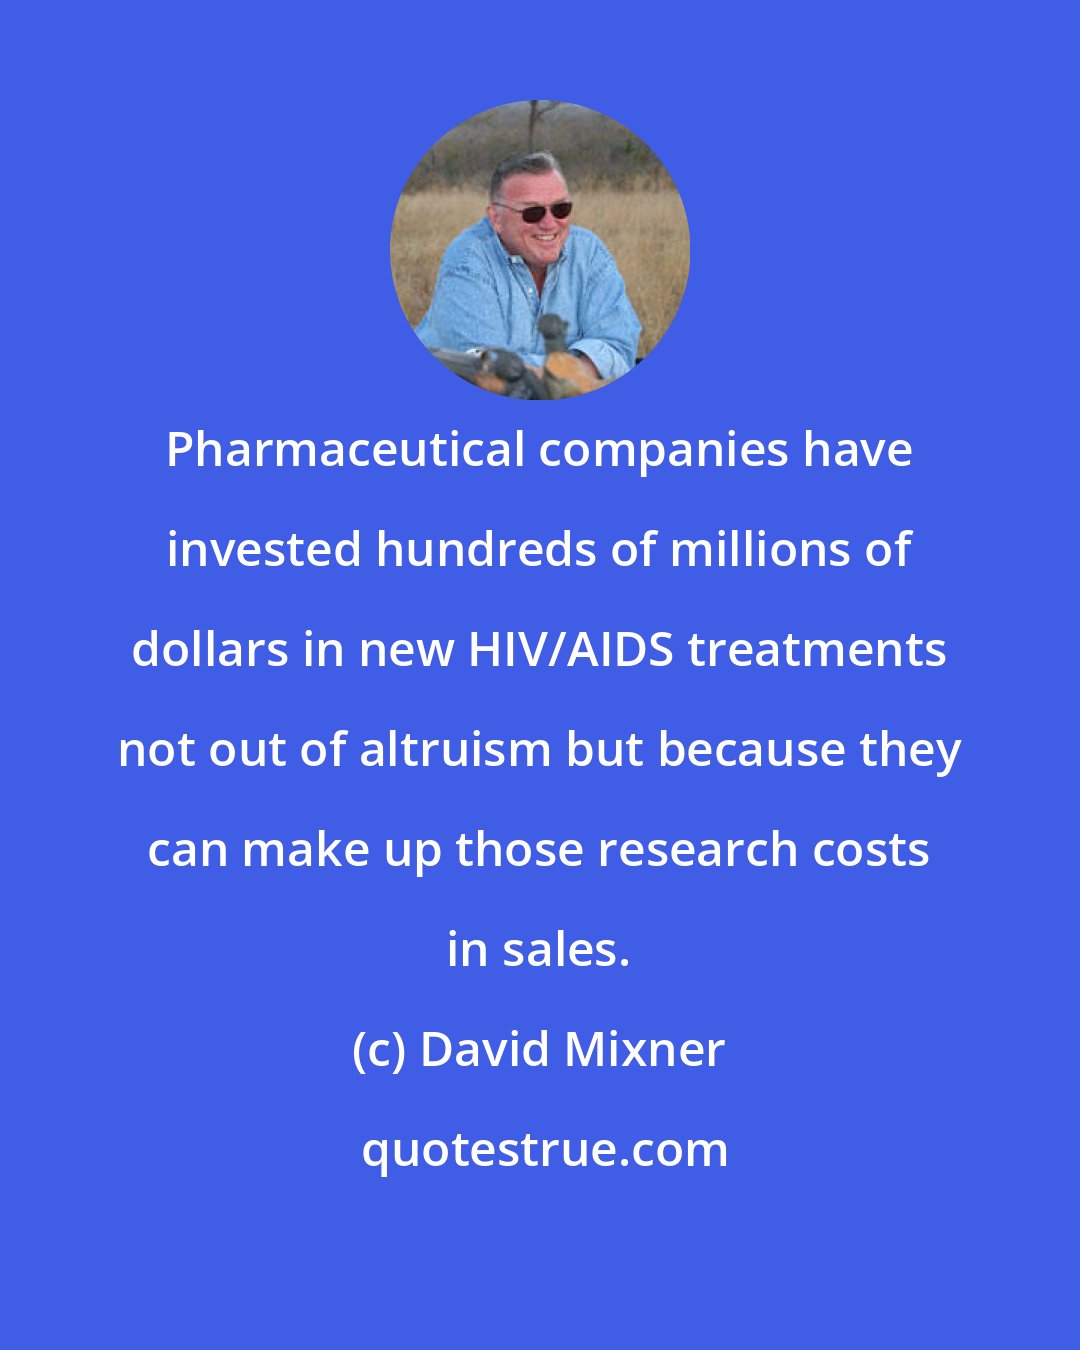 David Mixner: Pharmaceutical companies have invested hundreds of millions of dollars in new HIV/AIDS treatments not out of altruism but because they can make up those research costs in sales.